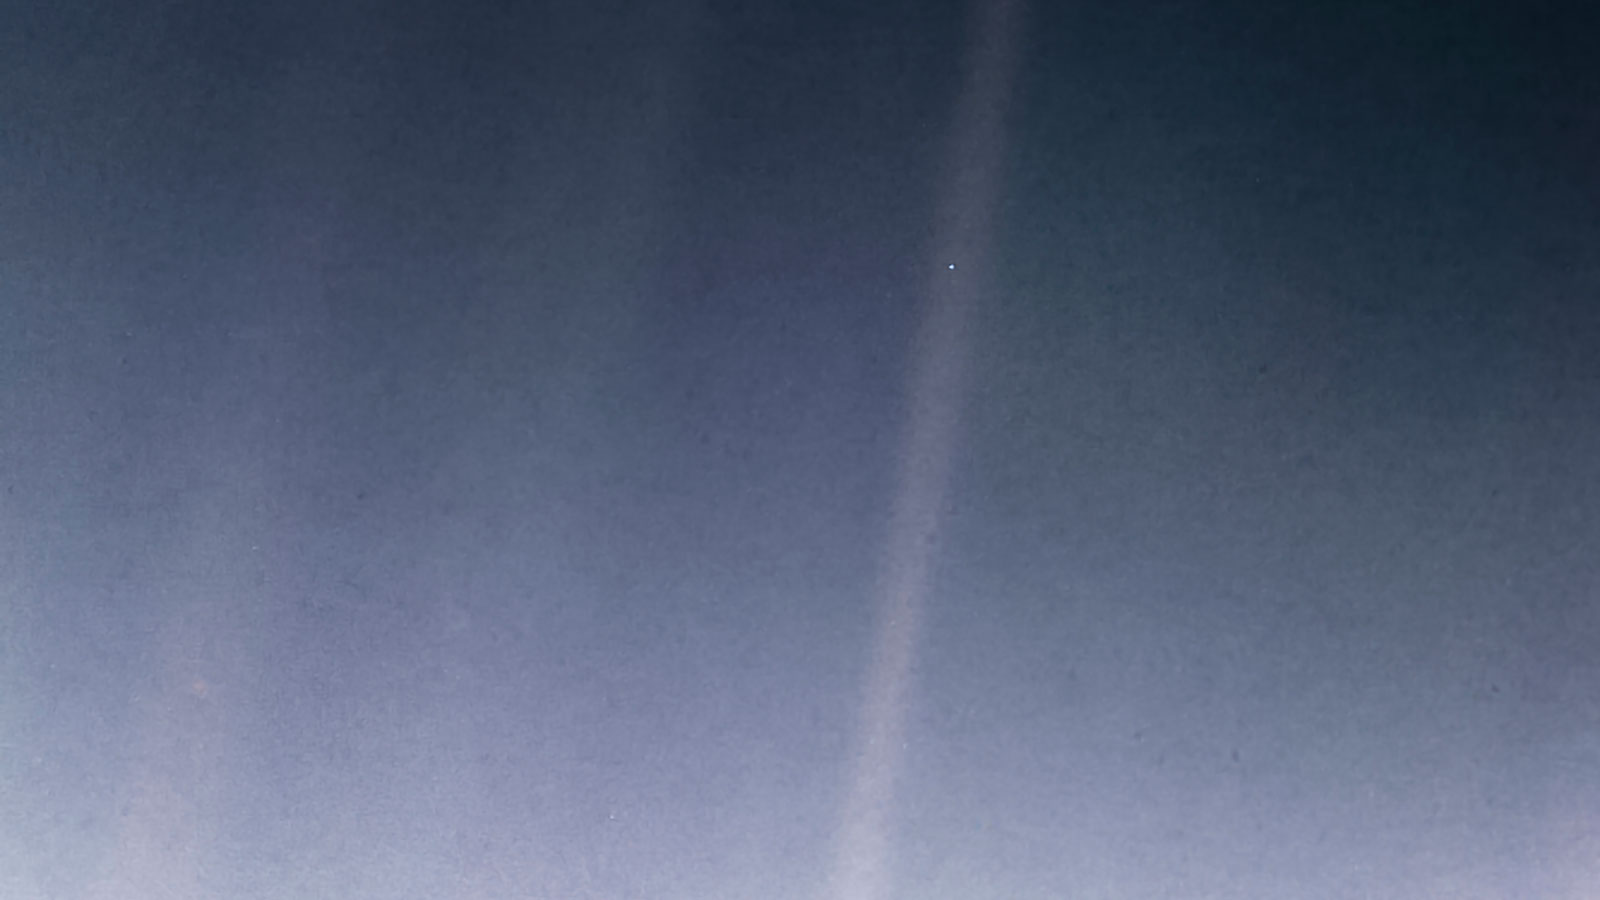 Distant view of Earth as a bright pale blue dot caught in a sunbeam.